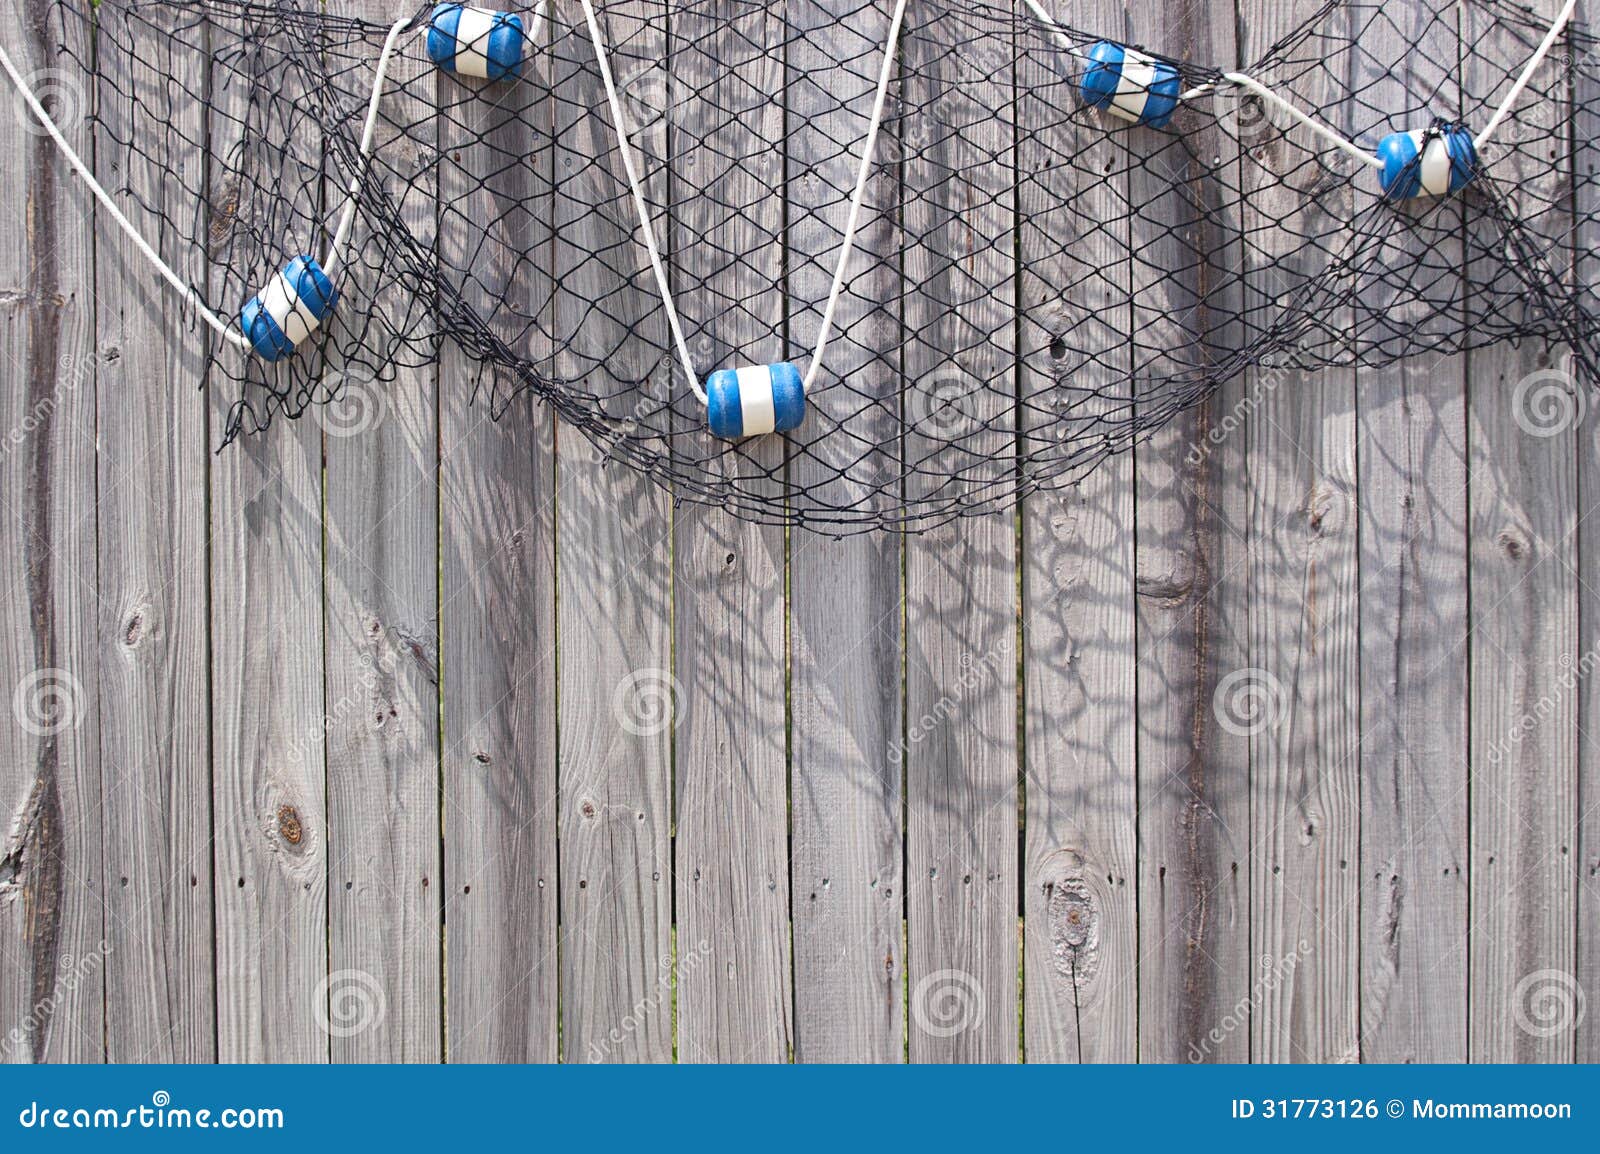 Fish Net with Floats on Wooden Fence Stock Photo - Image of hobby